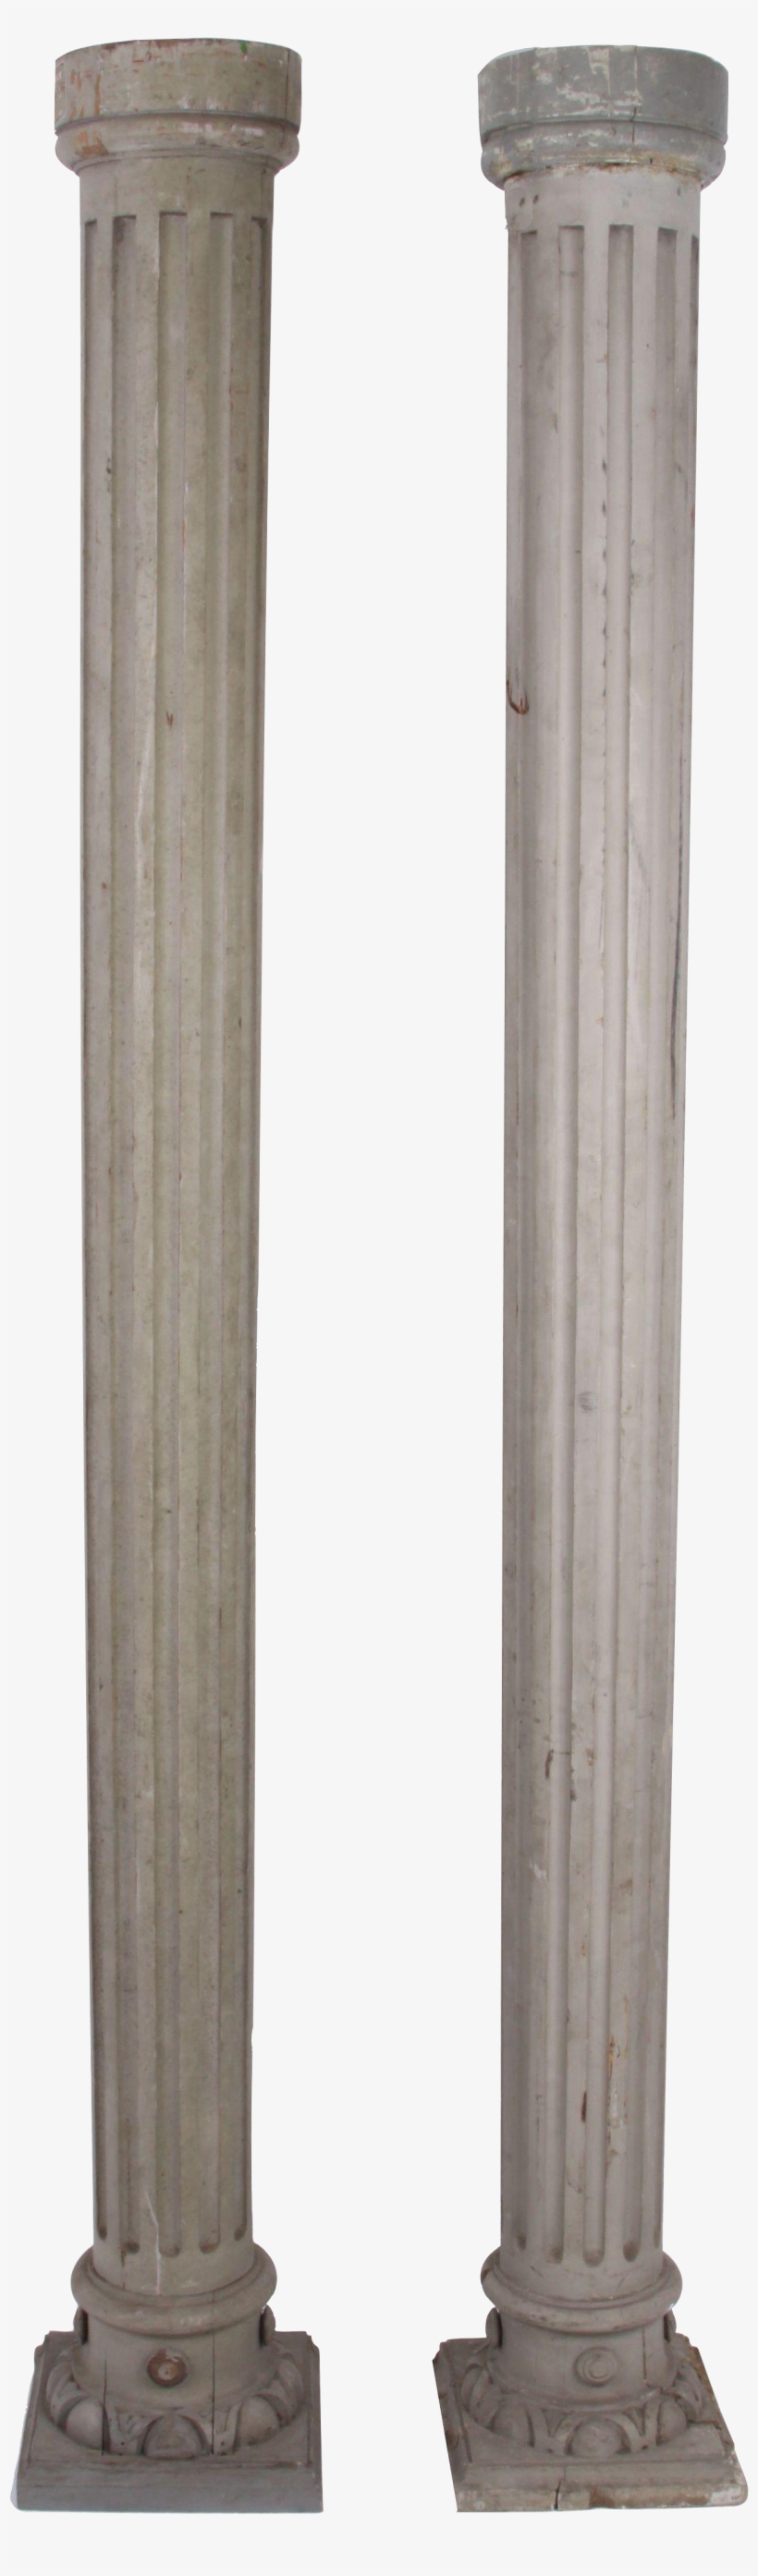 French Carved Wood Columns - Wood Columns Png, transparent png #5937990